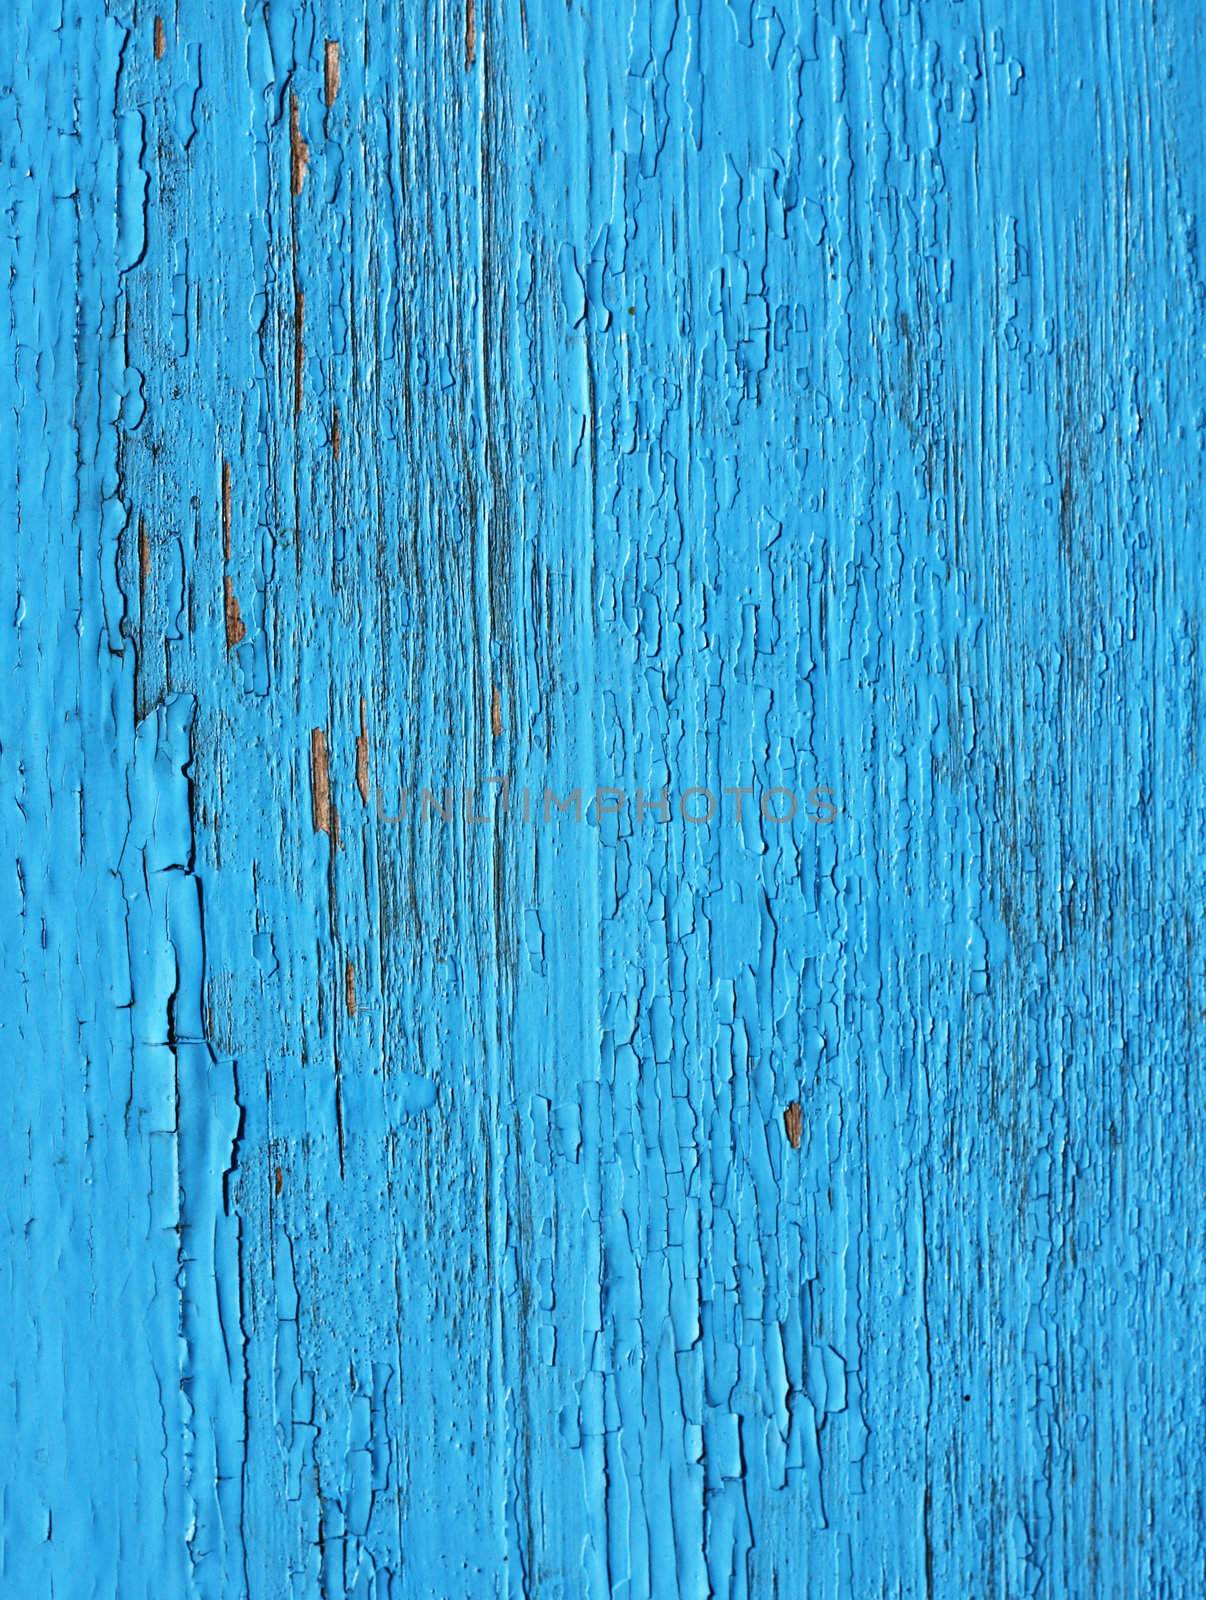 Closing on blue wooden panels of the fence  by schankz